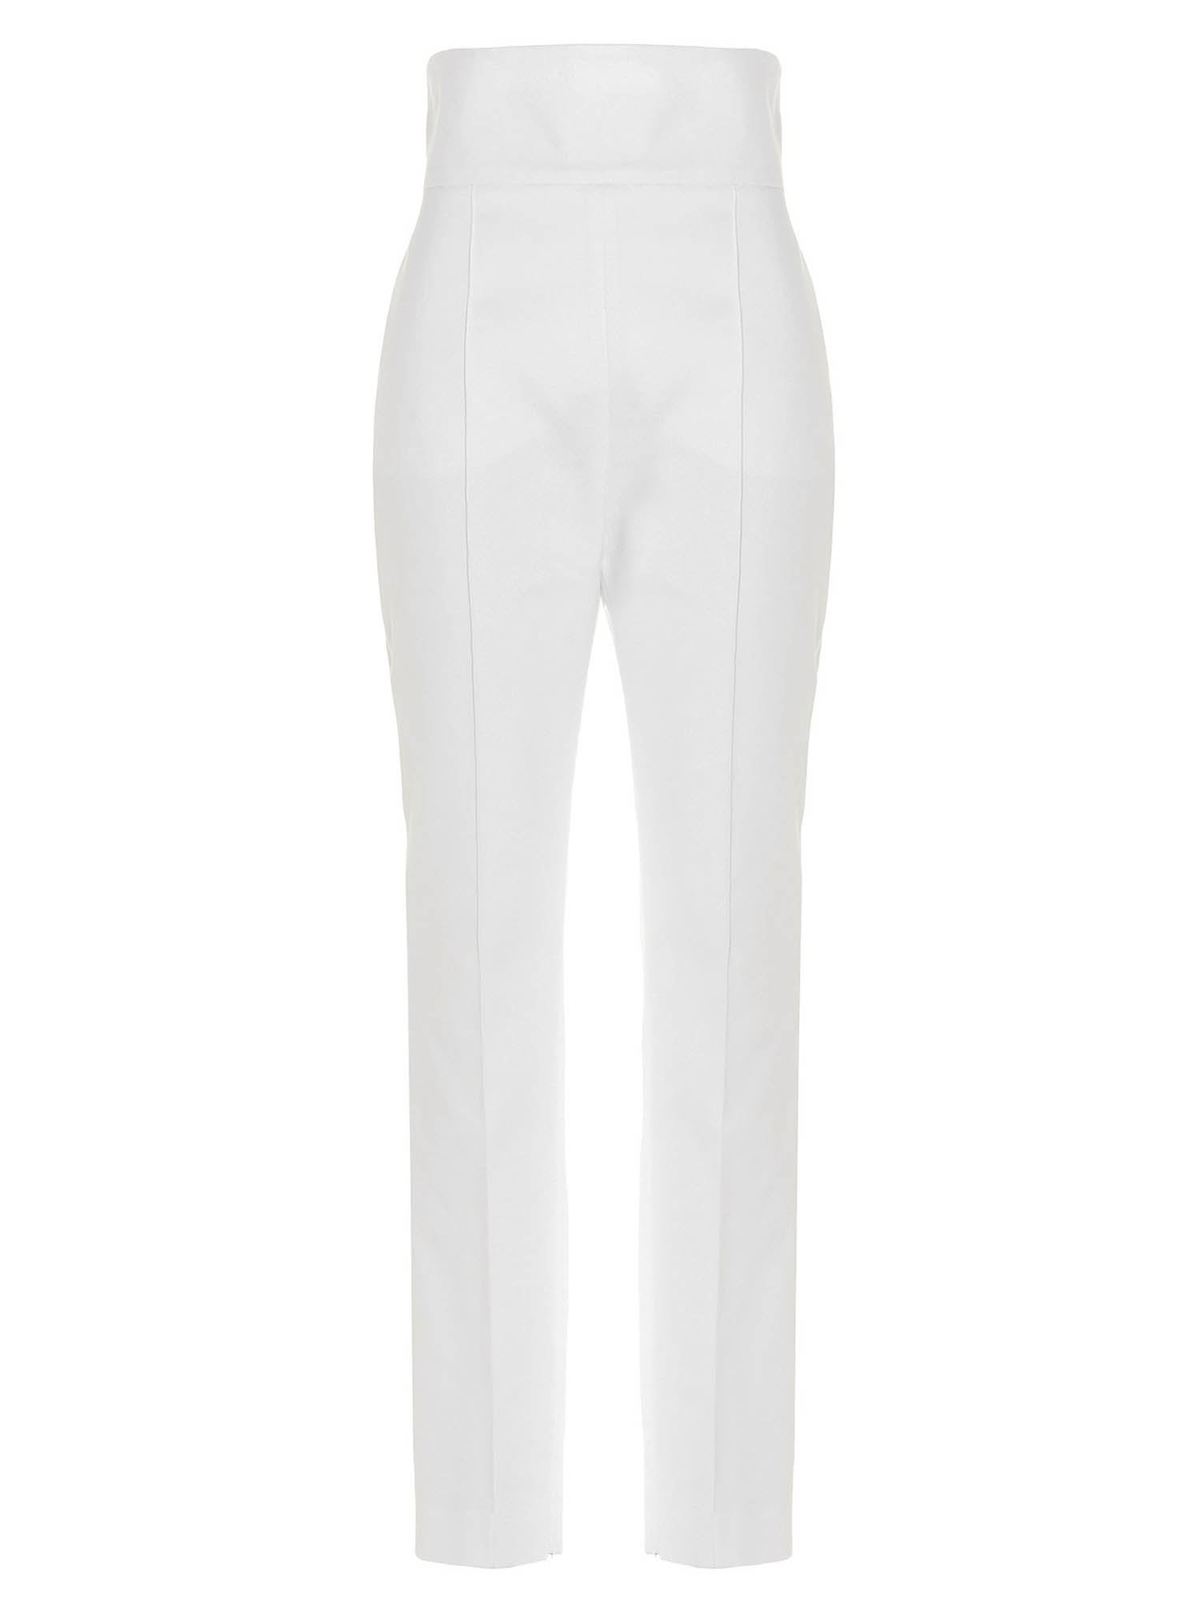 ALEXANDRE VAUTHIER HIGH-WAISTED TROUSERS IN WHITE